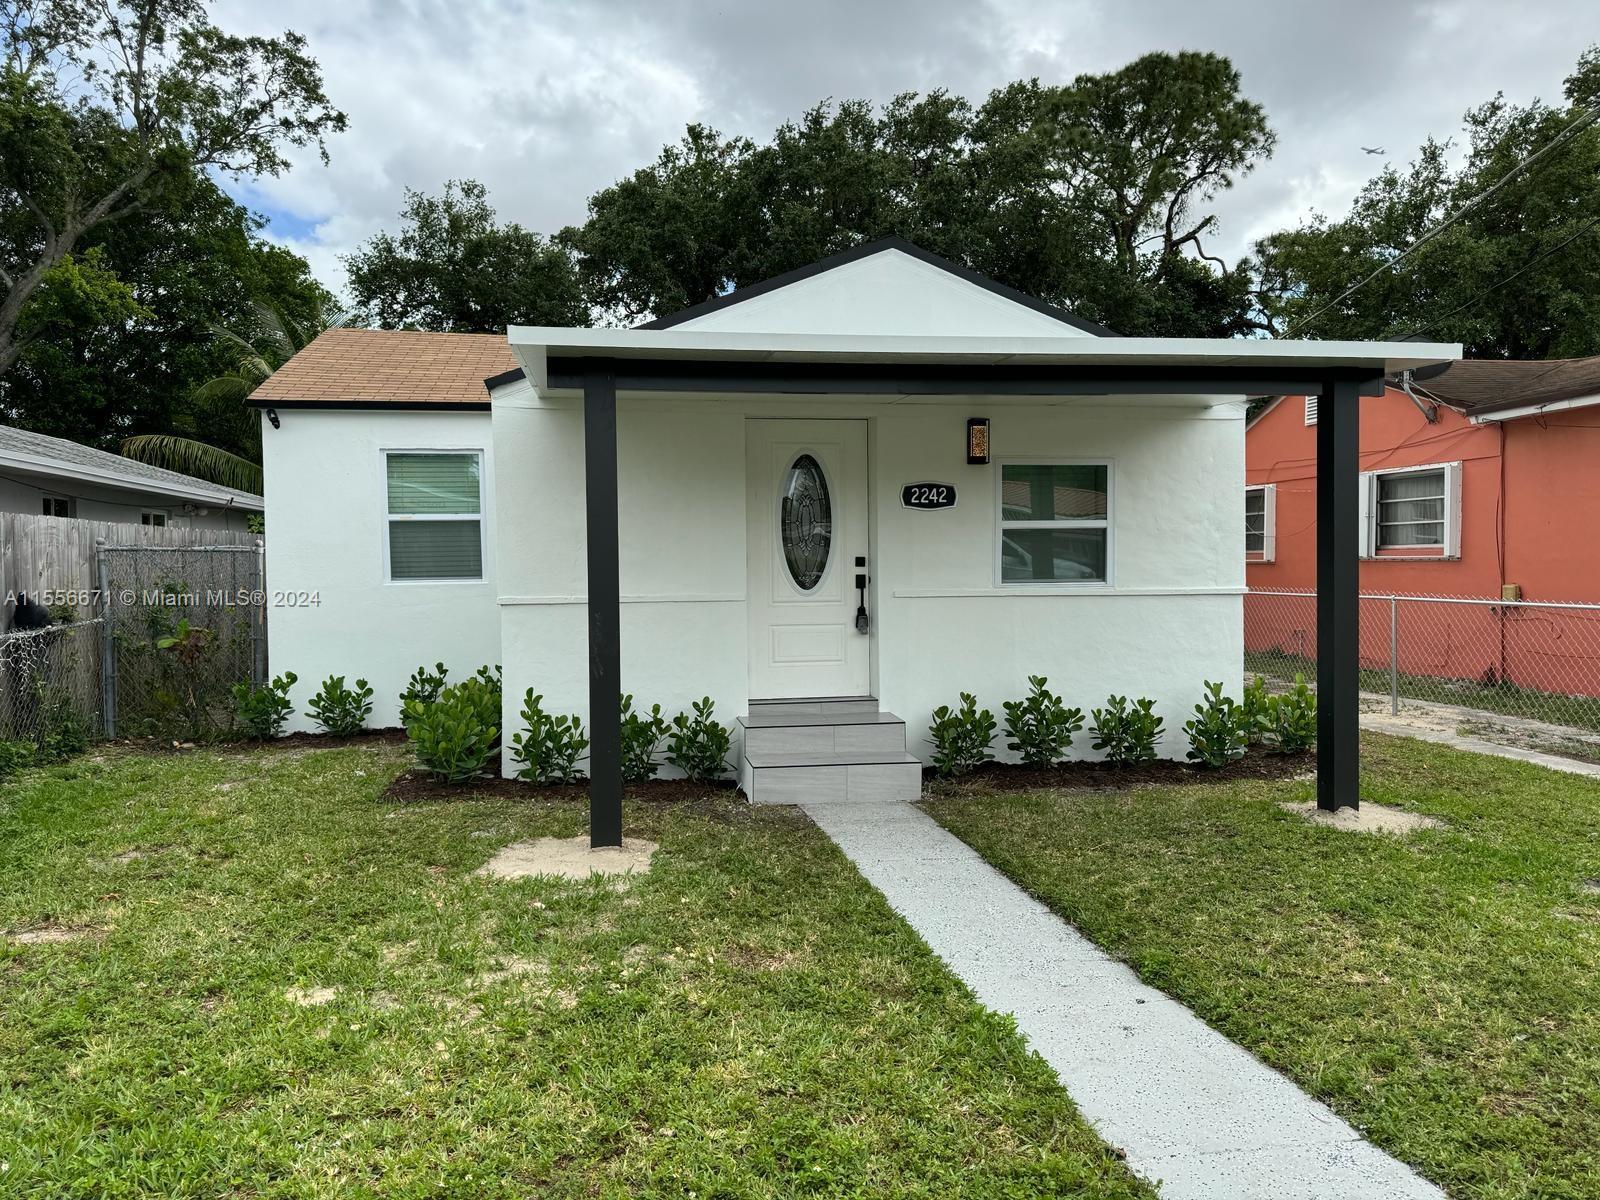 Photo of 2242 NW 49th St in Miami, FL